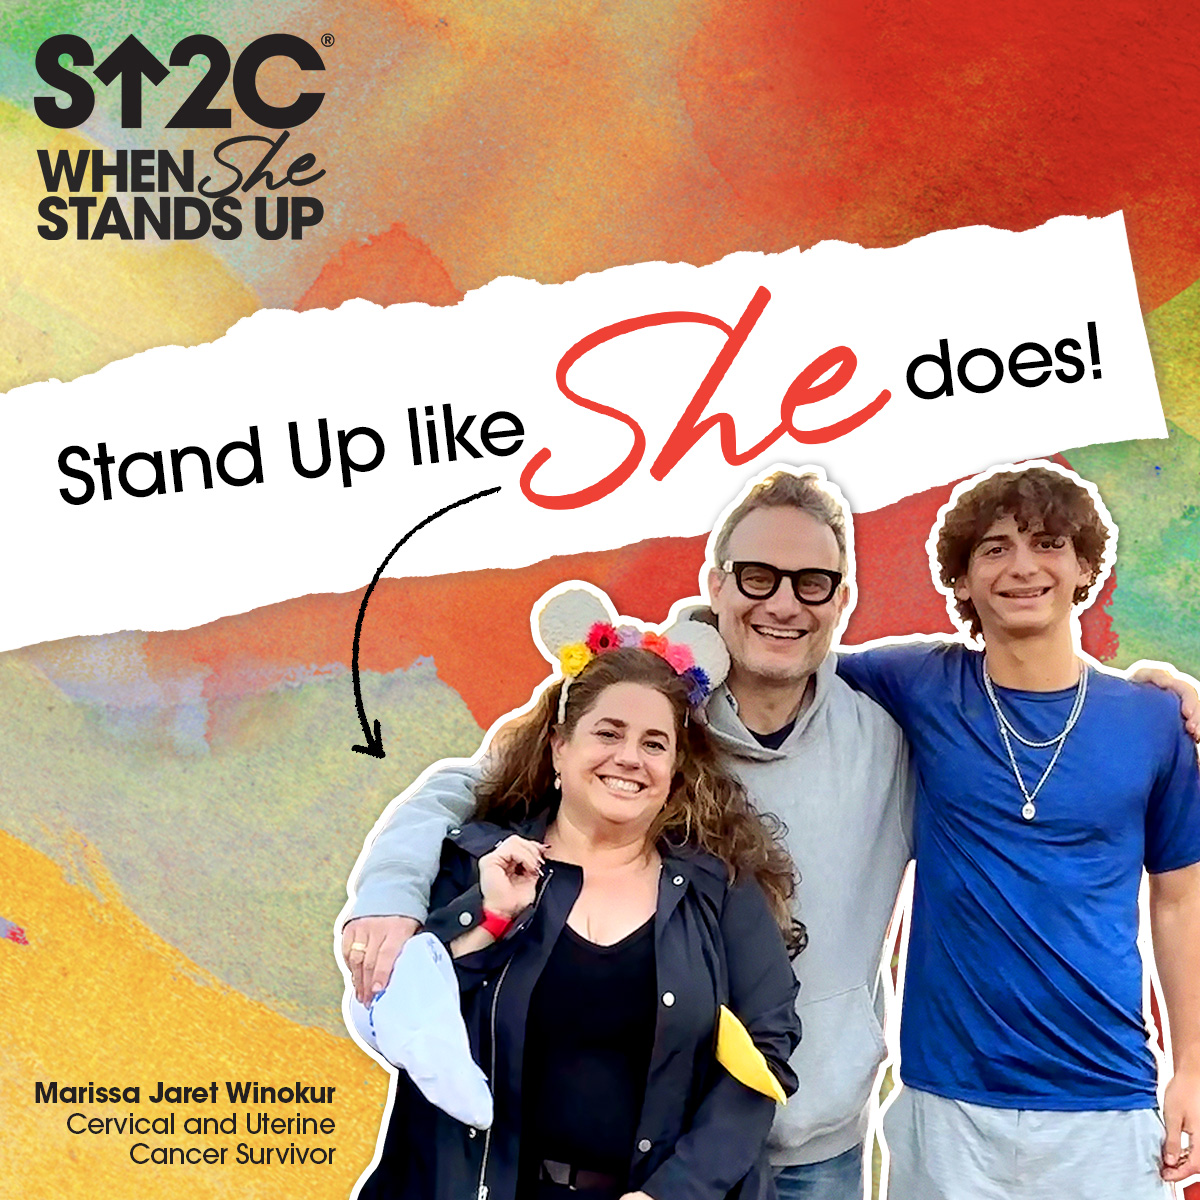 When actress & cervical/uterine cancer survivor @MarissaJWinokur was unable to carry a child, she persevered by finding a surrogate: 'As determined as I was to be a survivor, I was as determined to become a mother. My son turns 15 in July.' 🧡#StandUpToCancer #WhenSheStandsUp